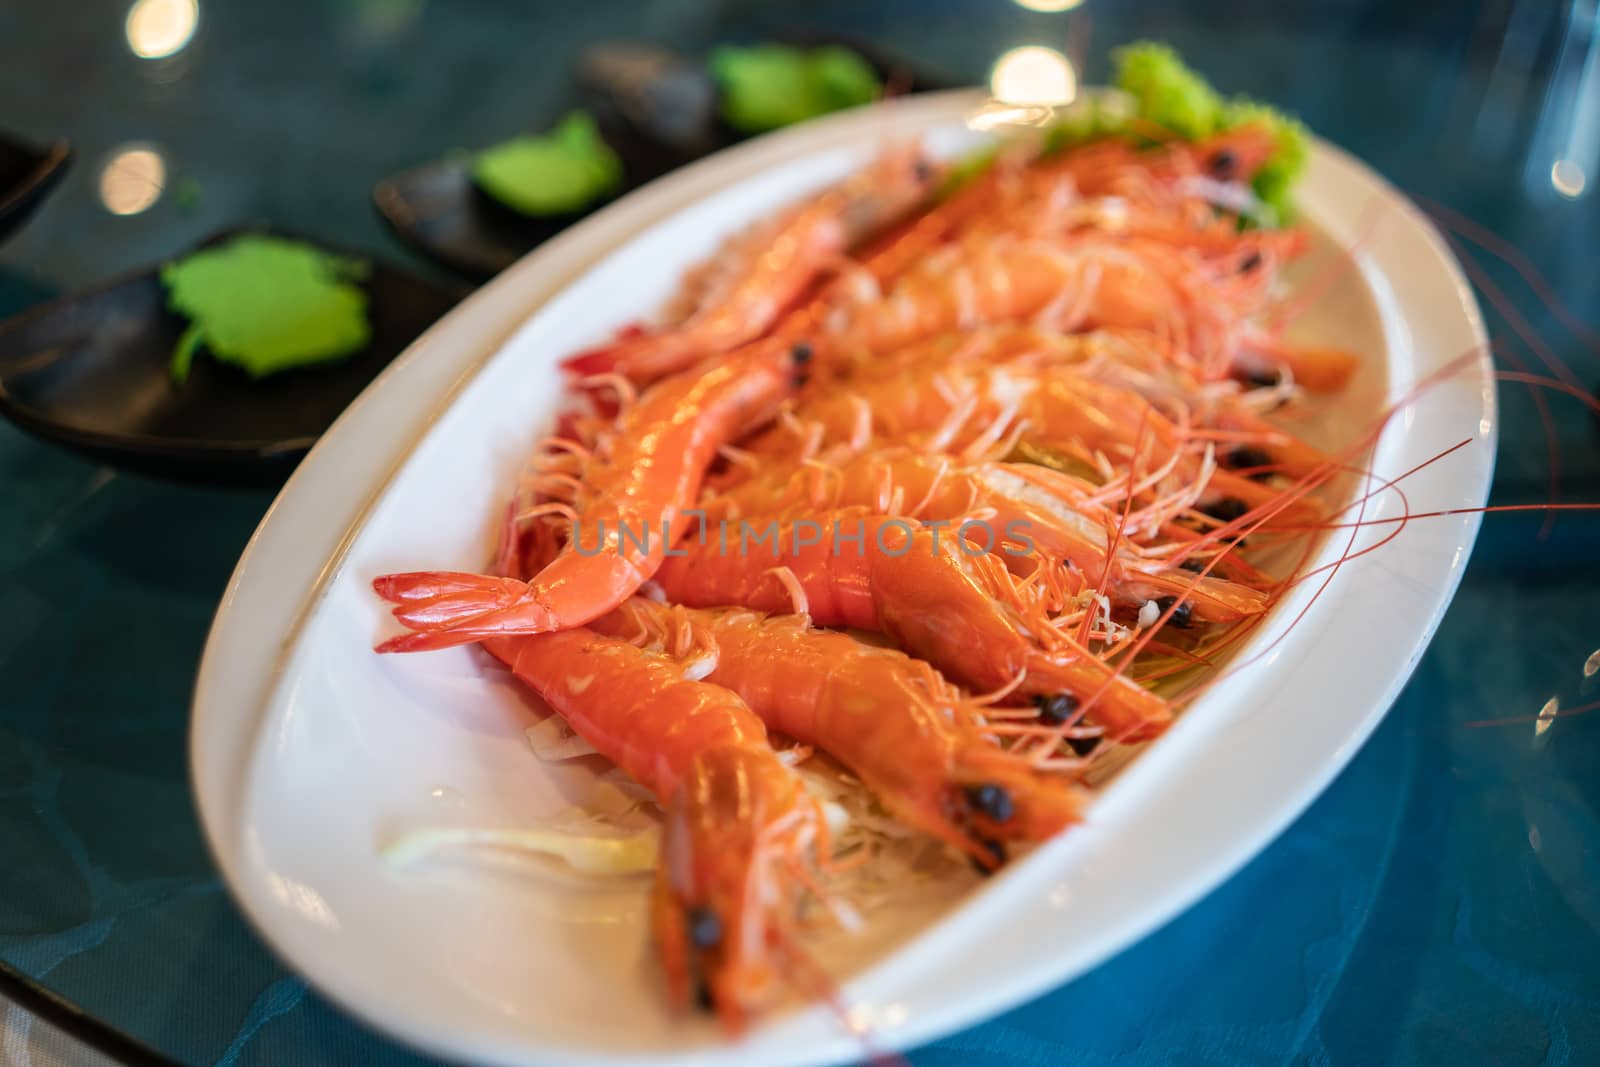 A Plate of Cooked Prawn in a Restaurant by kstphotography